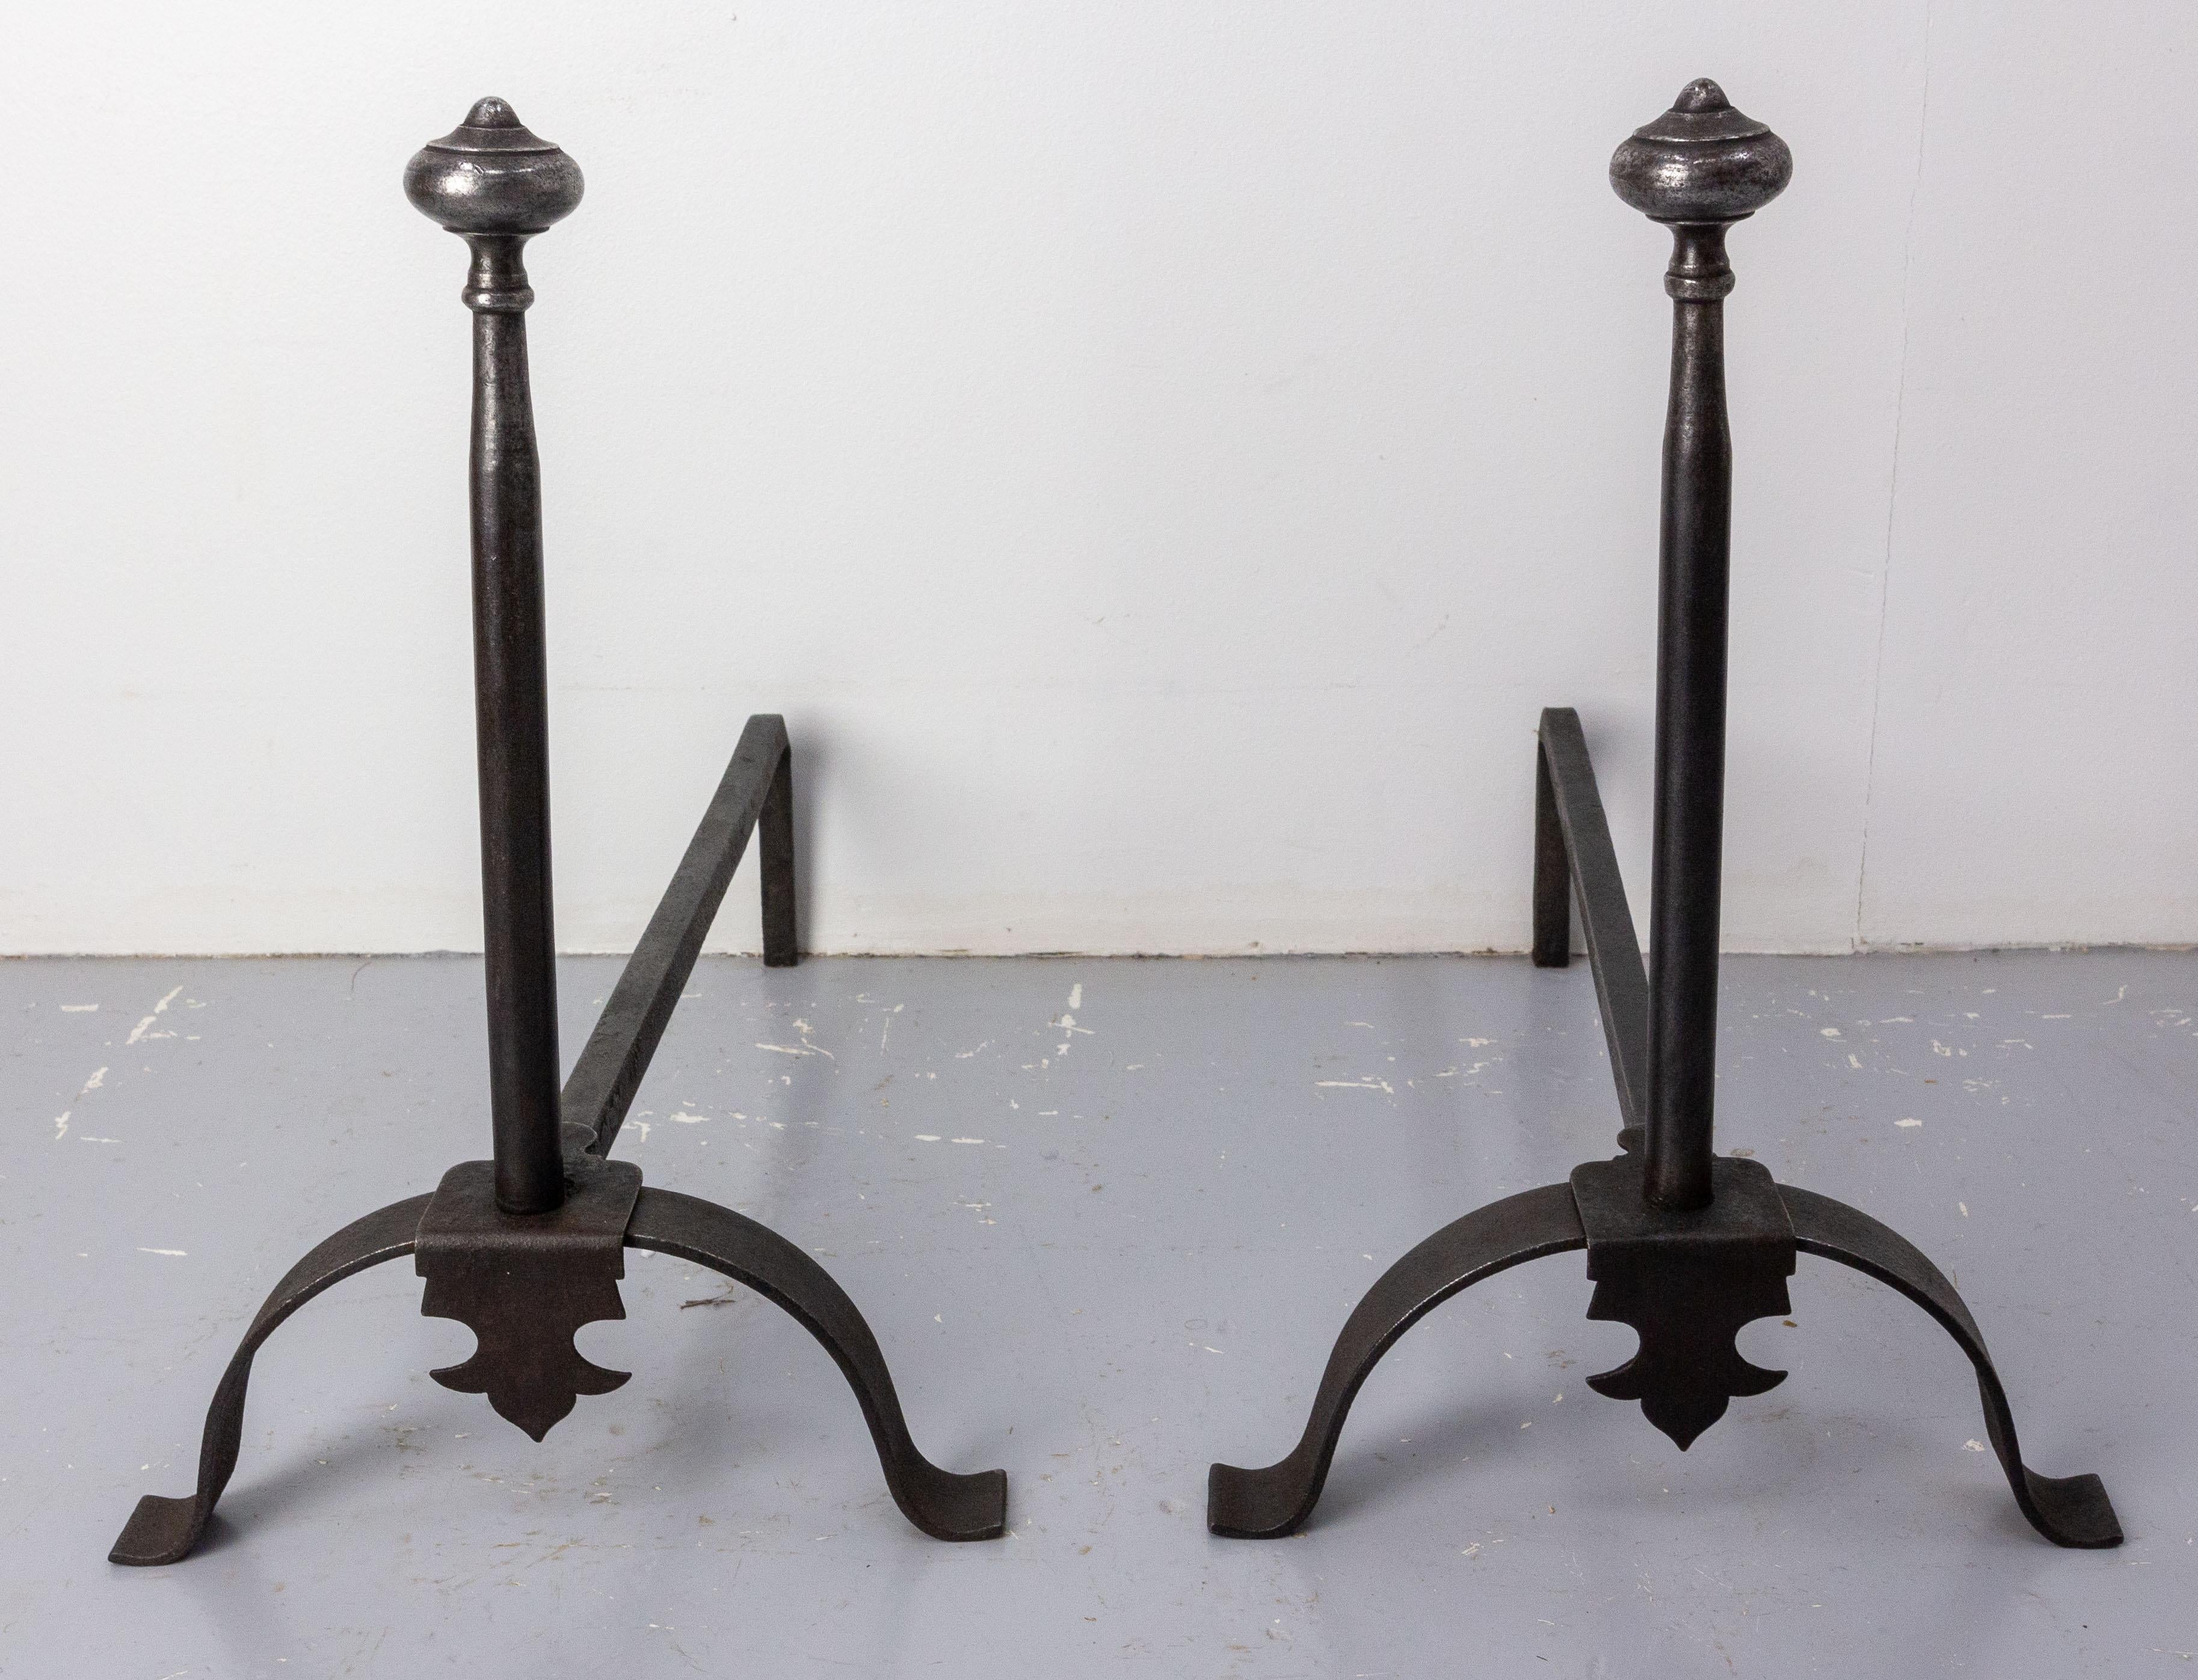 Pair of andirons of the period Mid-Century Modern
Wrought iron firedogs
France circa 1960.
Good condition

Shipping:
52 / 28 / 44 cm 4 kg.